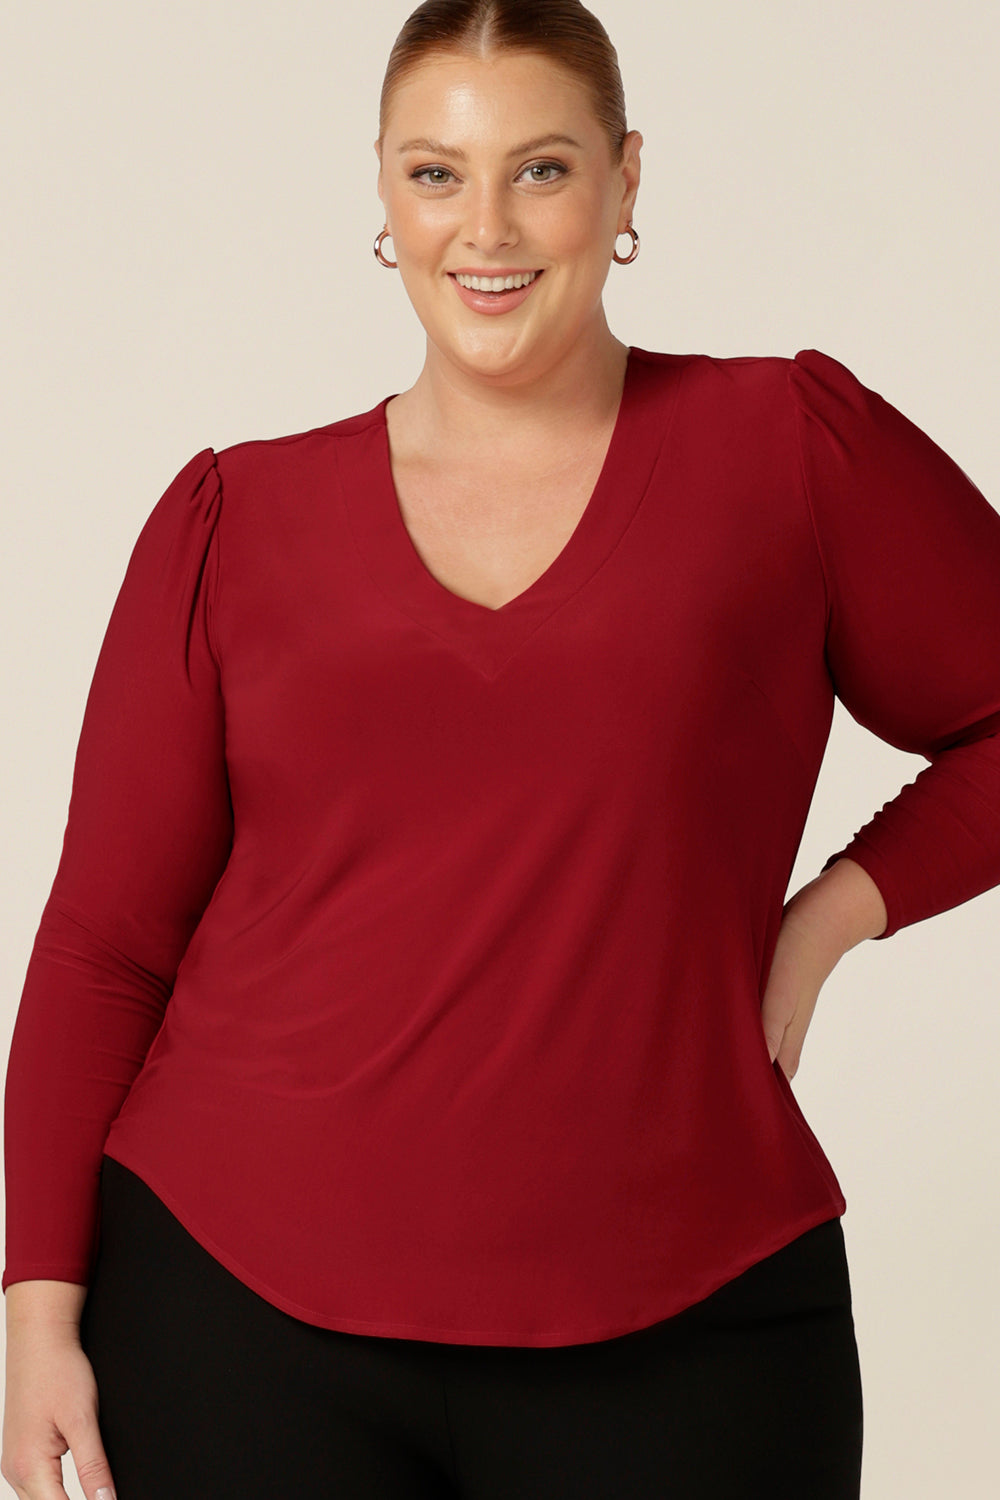 The perfect top for workwear and casual style, the Glyn Top in Flame red jersey features a V neck, shirttail hemline and long sleeves. Worn by a fuller figure, size 18 woman, this jersey top comes in an inclusive size range of sizes 8 - 24. 